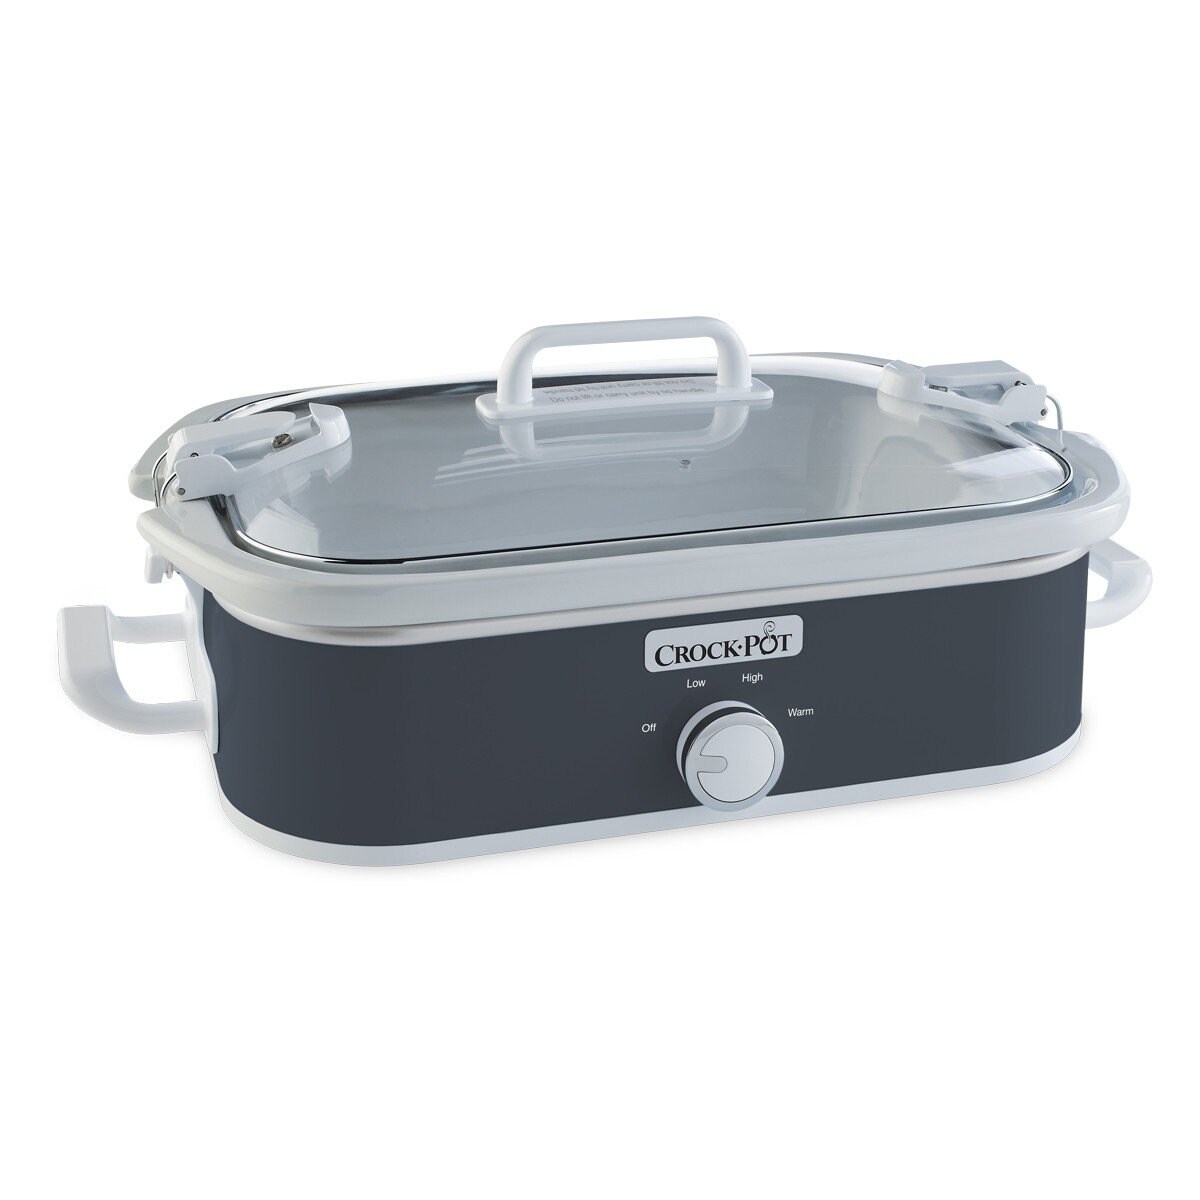 https://ak1.ostkcdn.com/images/products/is/images/direct/e4f445ca500e64e5e331bae51d95c786afd77adb/Small-3.5-Quart-Casserole-Manual-Slow-Cooker-and-Food-Warmer%2C-Charcoal.jpg